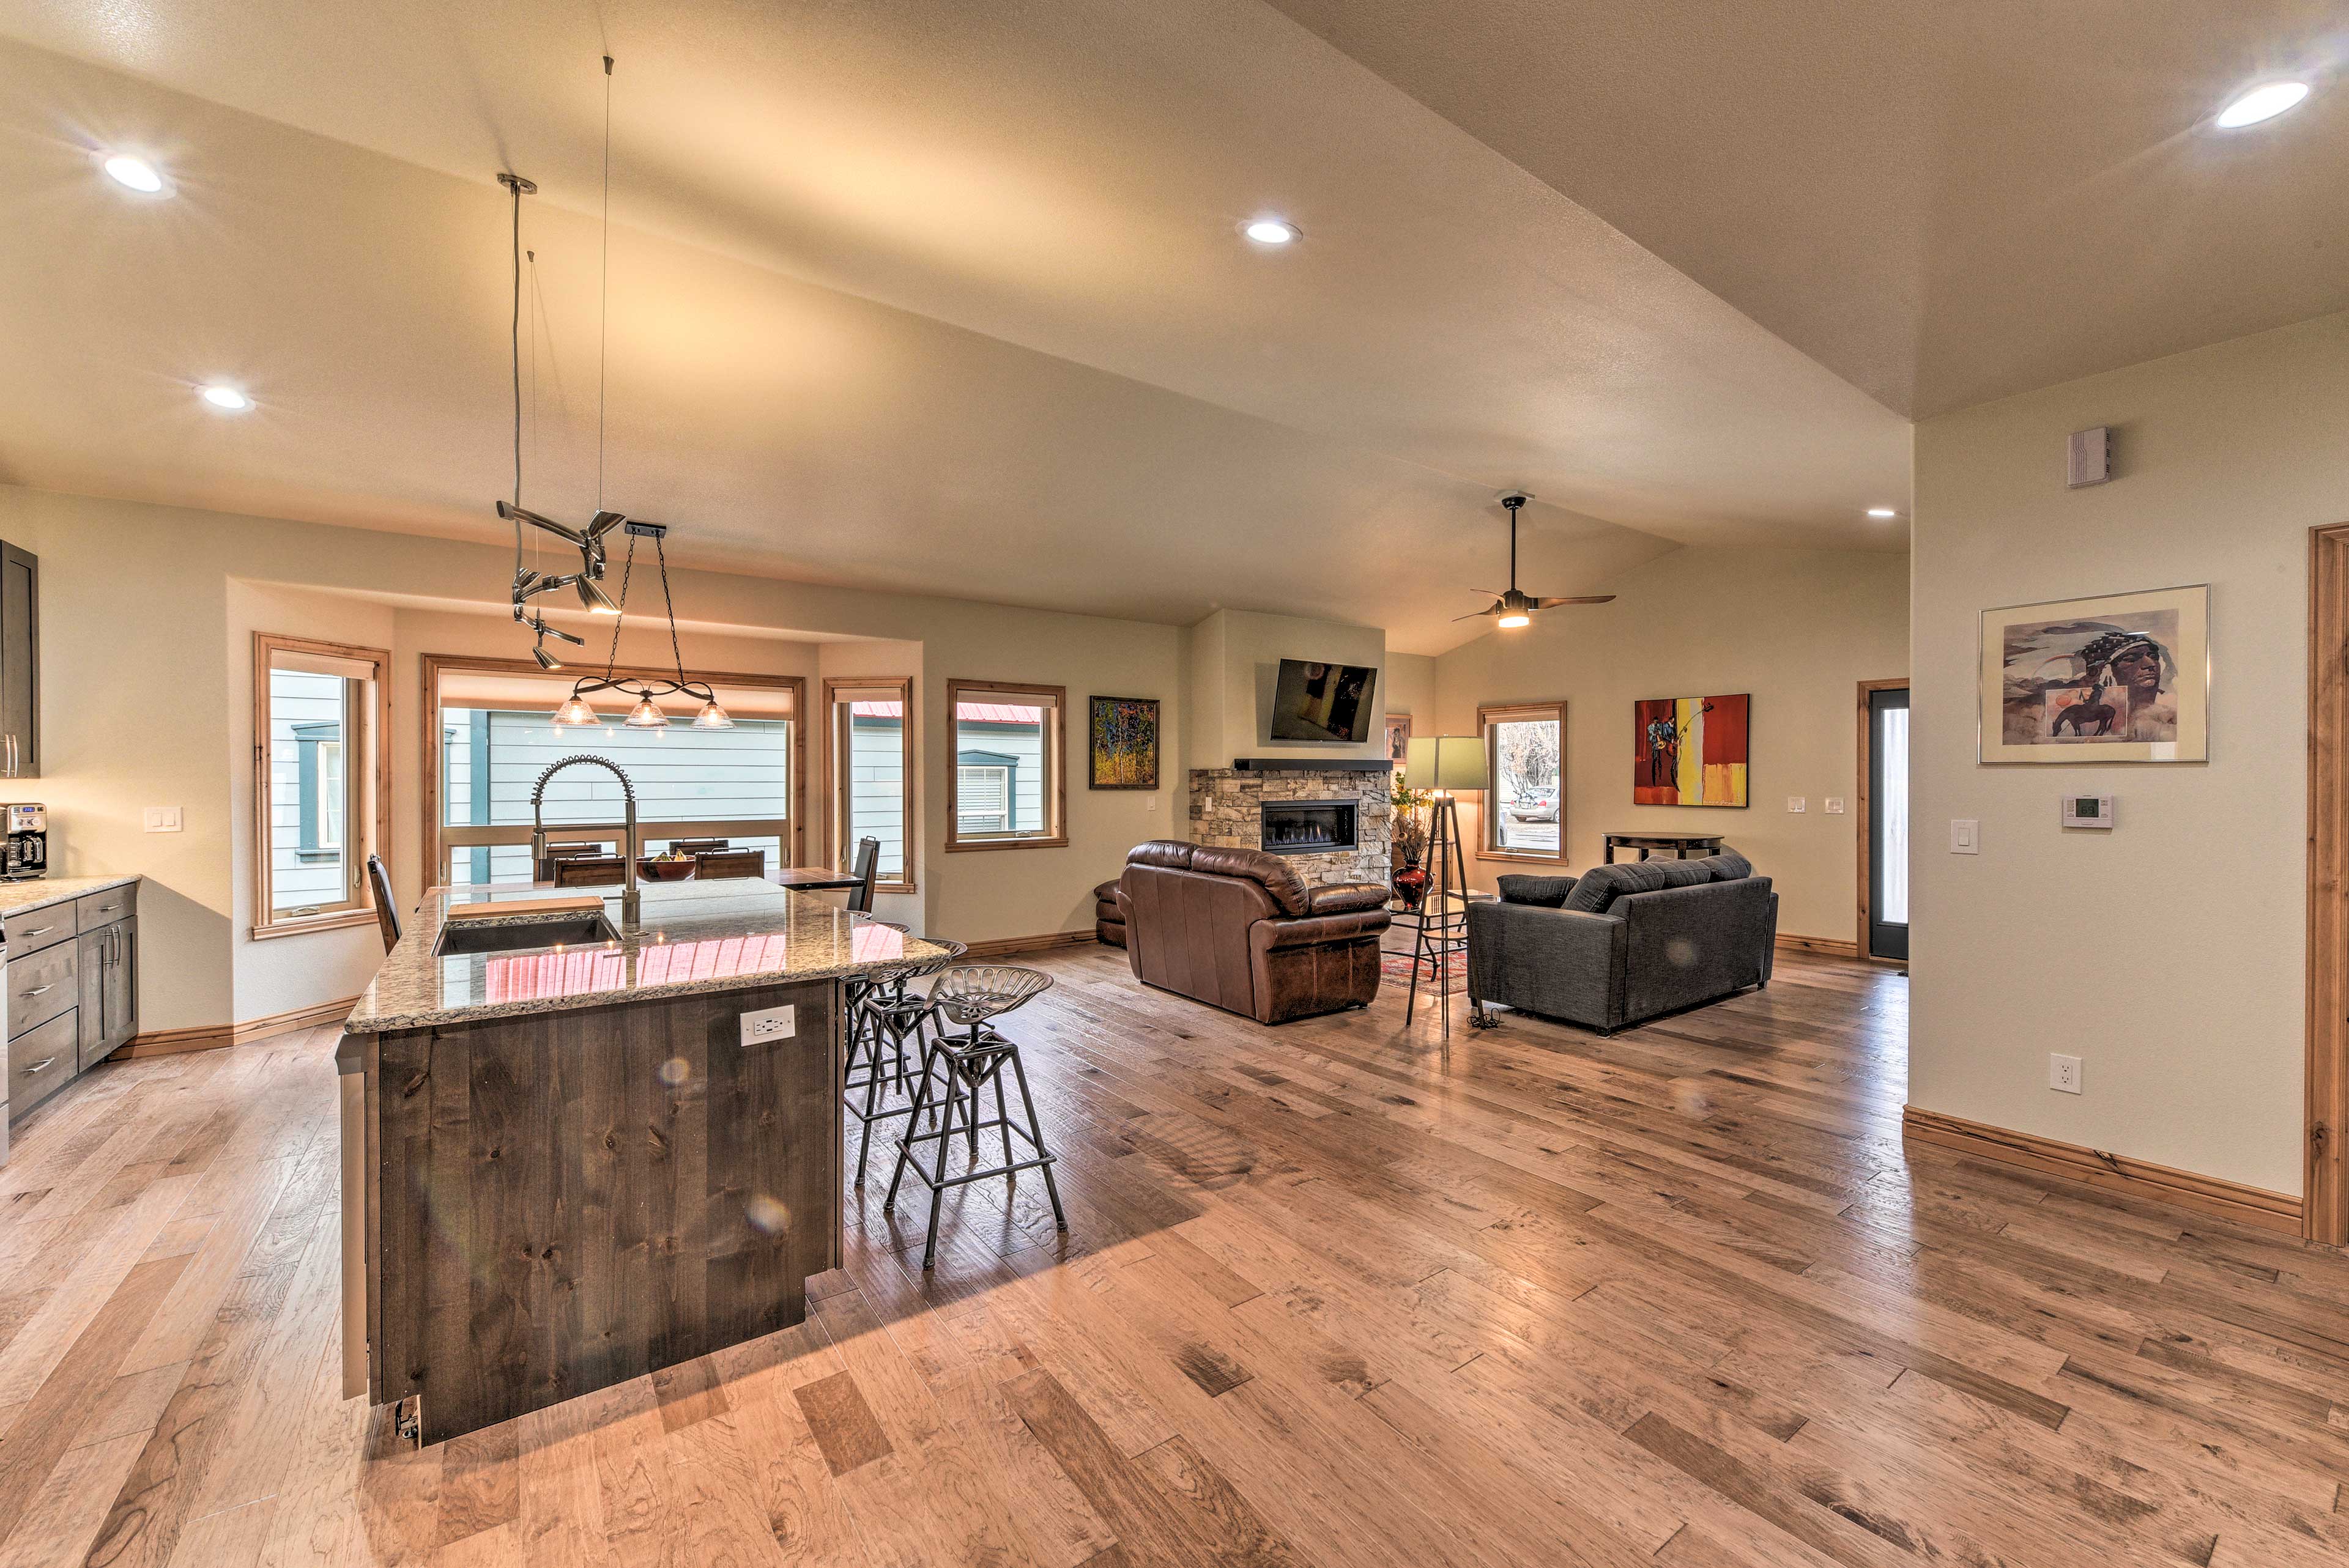 You'll quickly fall in love with this open-concept home!